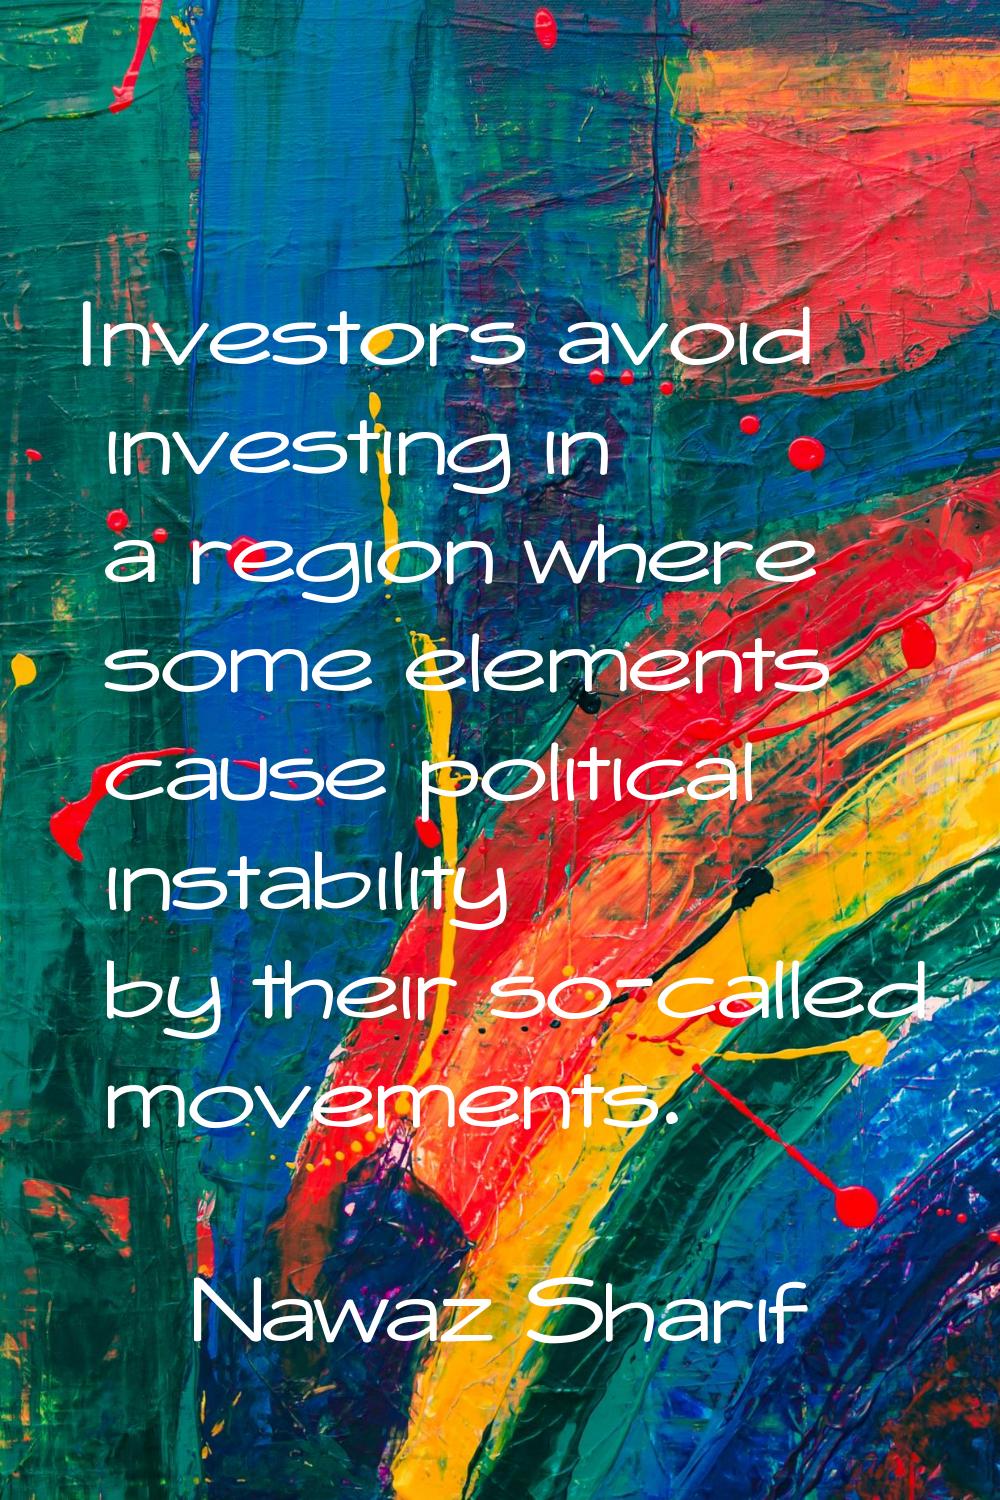 Investors avoid investing in a region where some elements cause political instability by their so-c